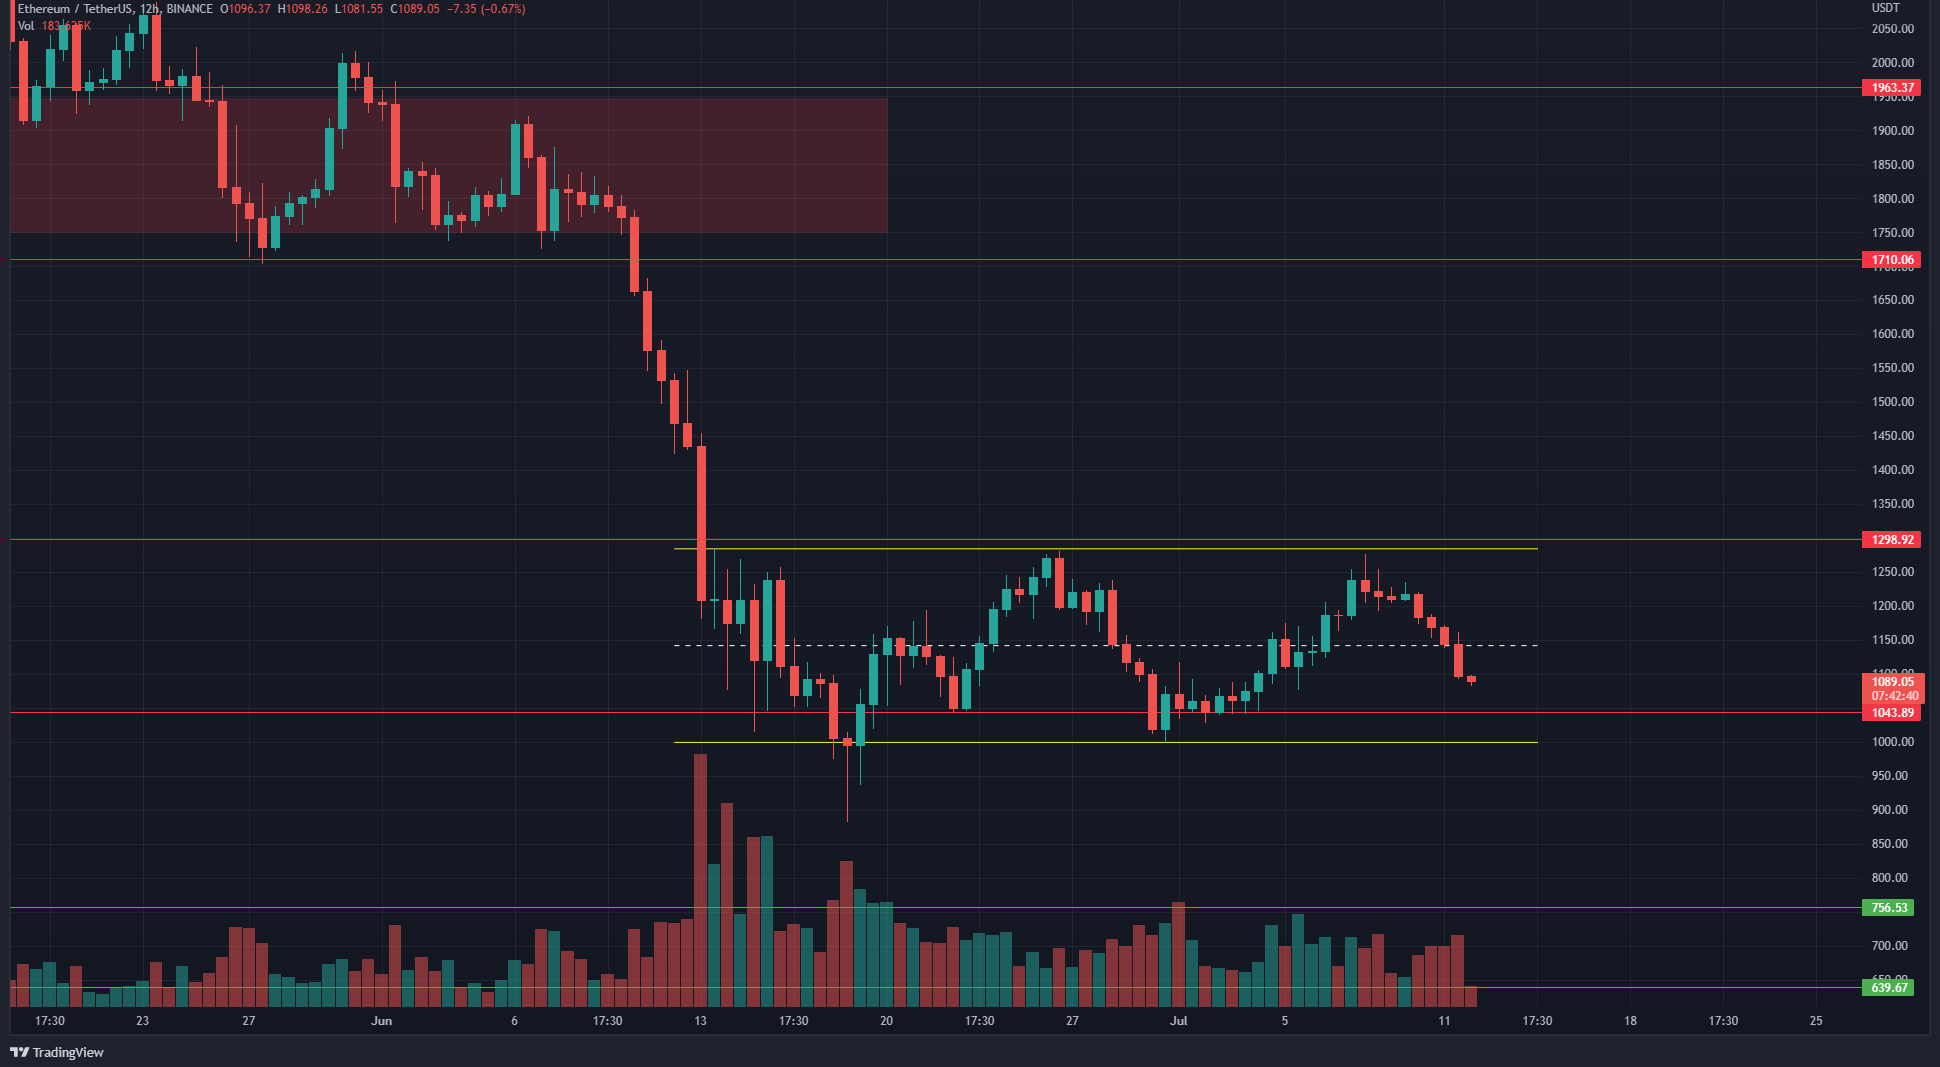 If Ethereum Falls Below 1000 Heres The Next Support If Ethereum Falls Below $1,000, Here's The Next Support